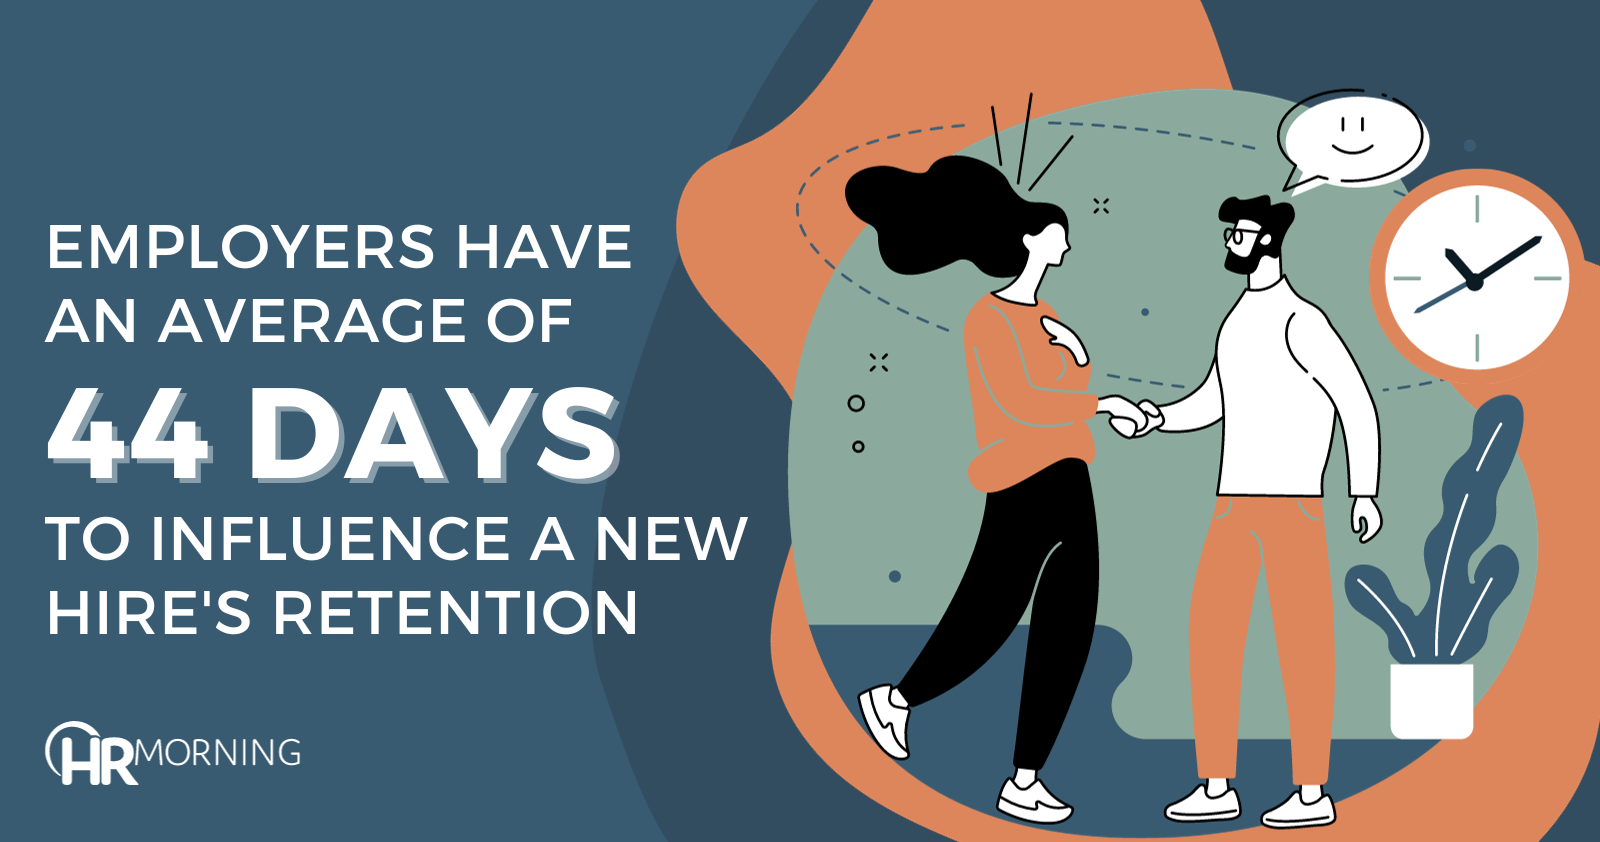 Employers have an average of 44 days to influence a new hire's retention